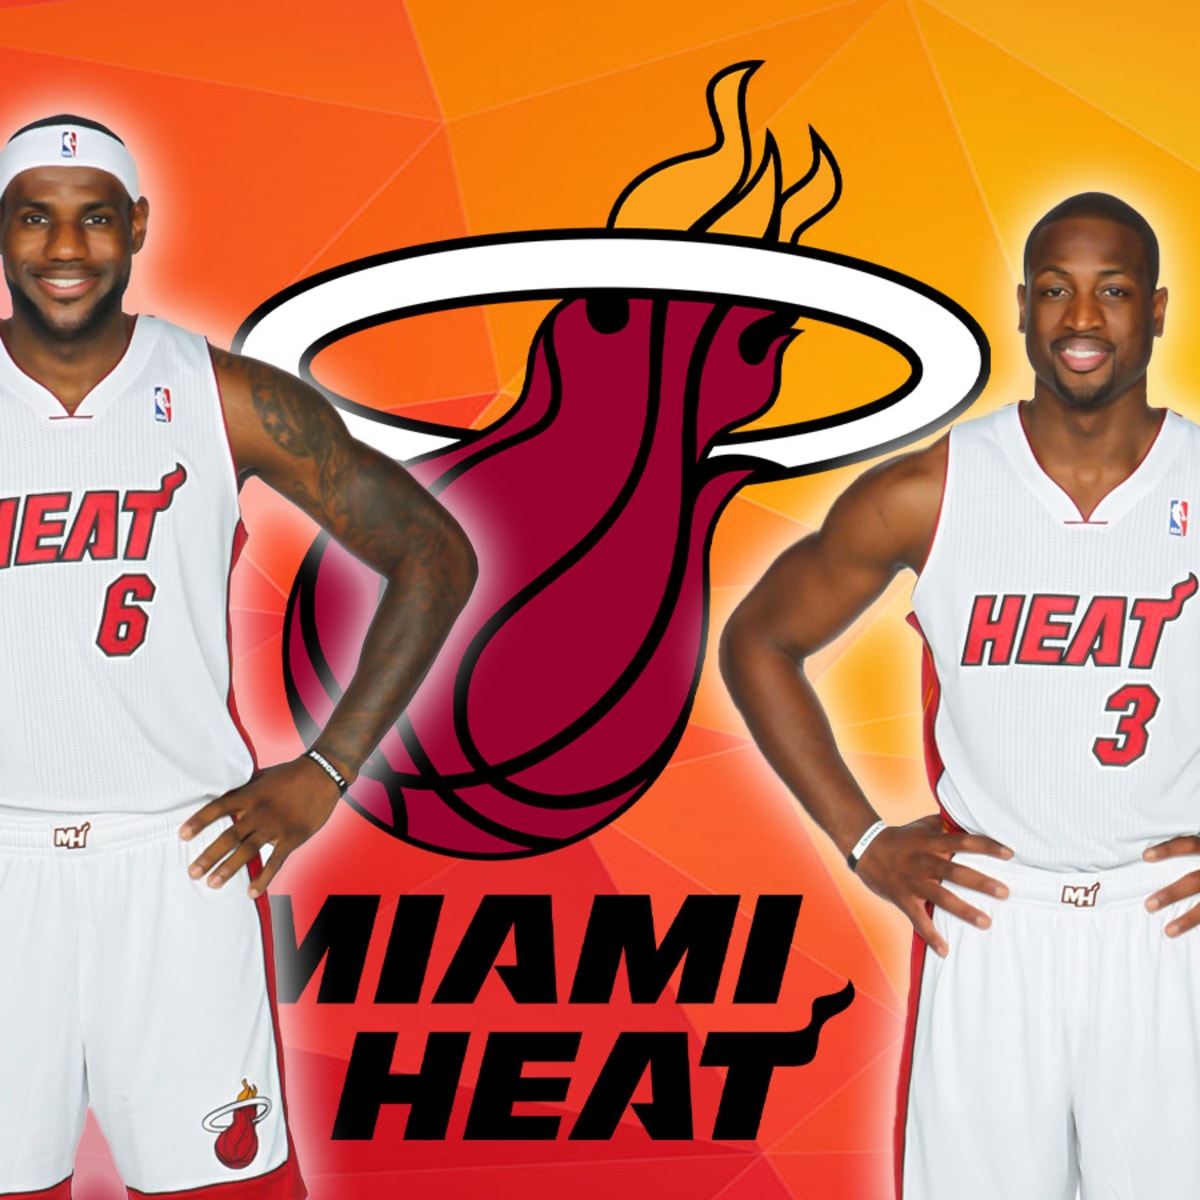 Pat Riley predicts Heat will re-sign Dwyane Wade and Udonis Haslem